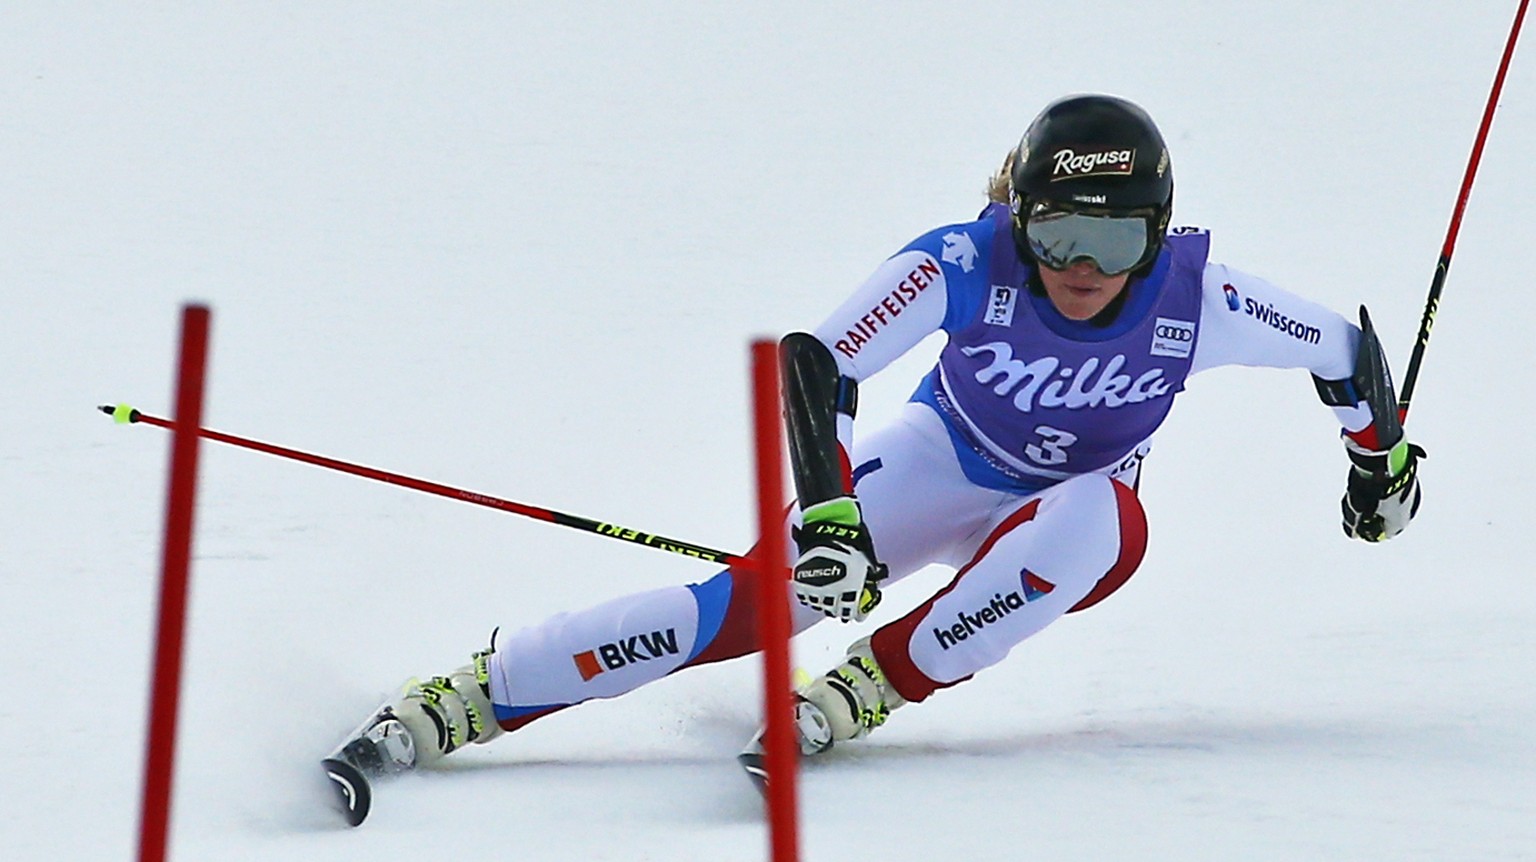 Switzerland&#039;s Lara Gut competes during the first run of an alpine ski, women&#039;s World Cup giant slalom in Courchevel, France, Tuesday, Dec. 20, 2016. (AP Photo/ Giovanni Auletta)